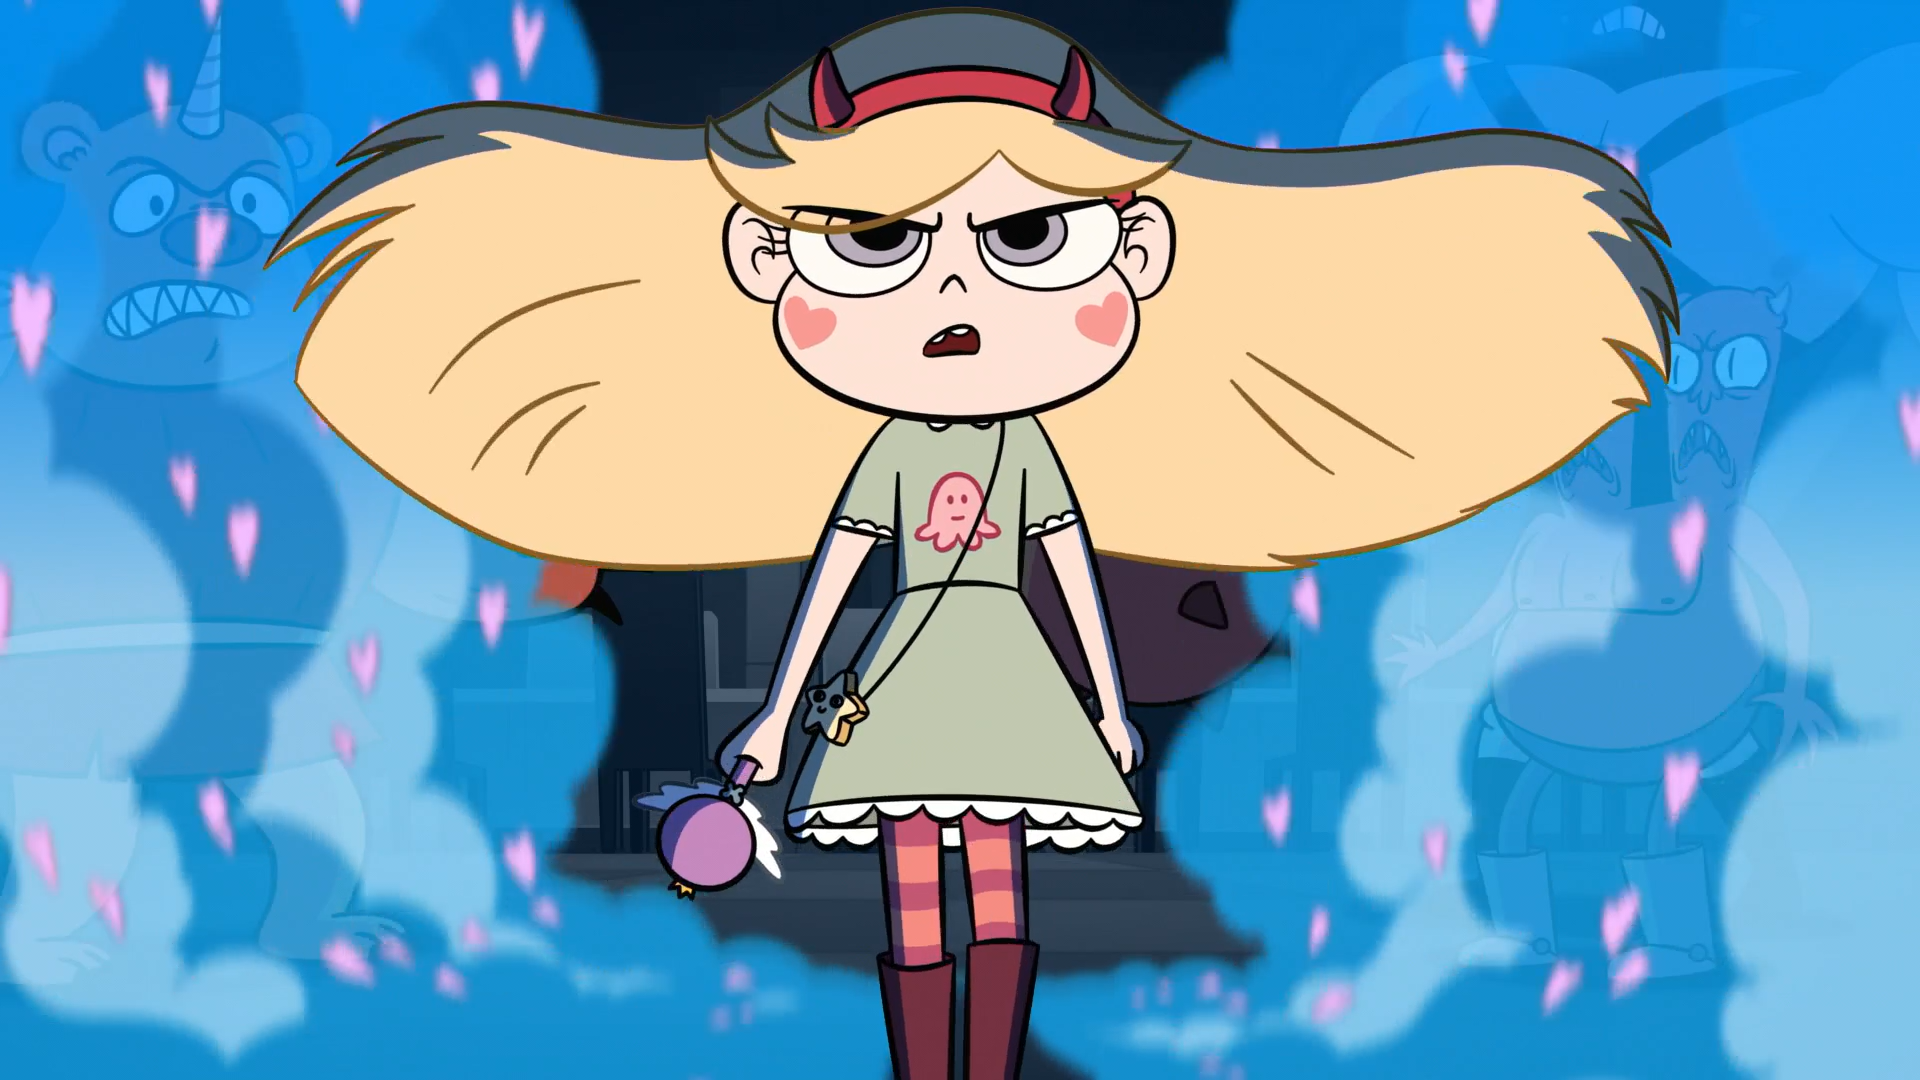 Don't mess with Star